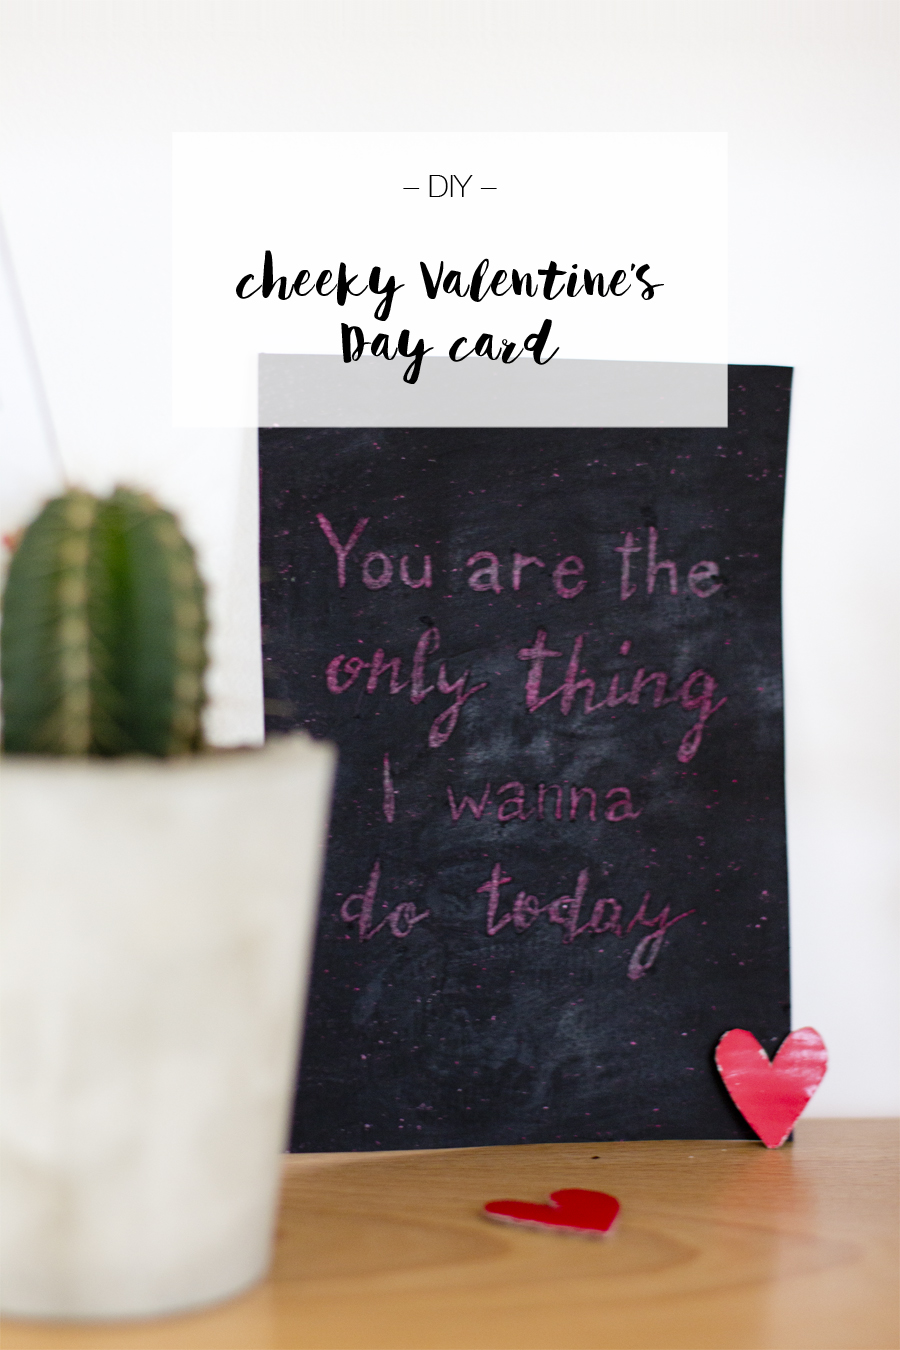 Cheeky Valentine's Day card DIY idea | LOOK WHAT I MADE ...